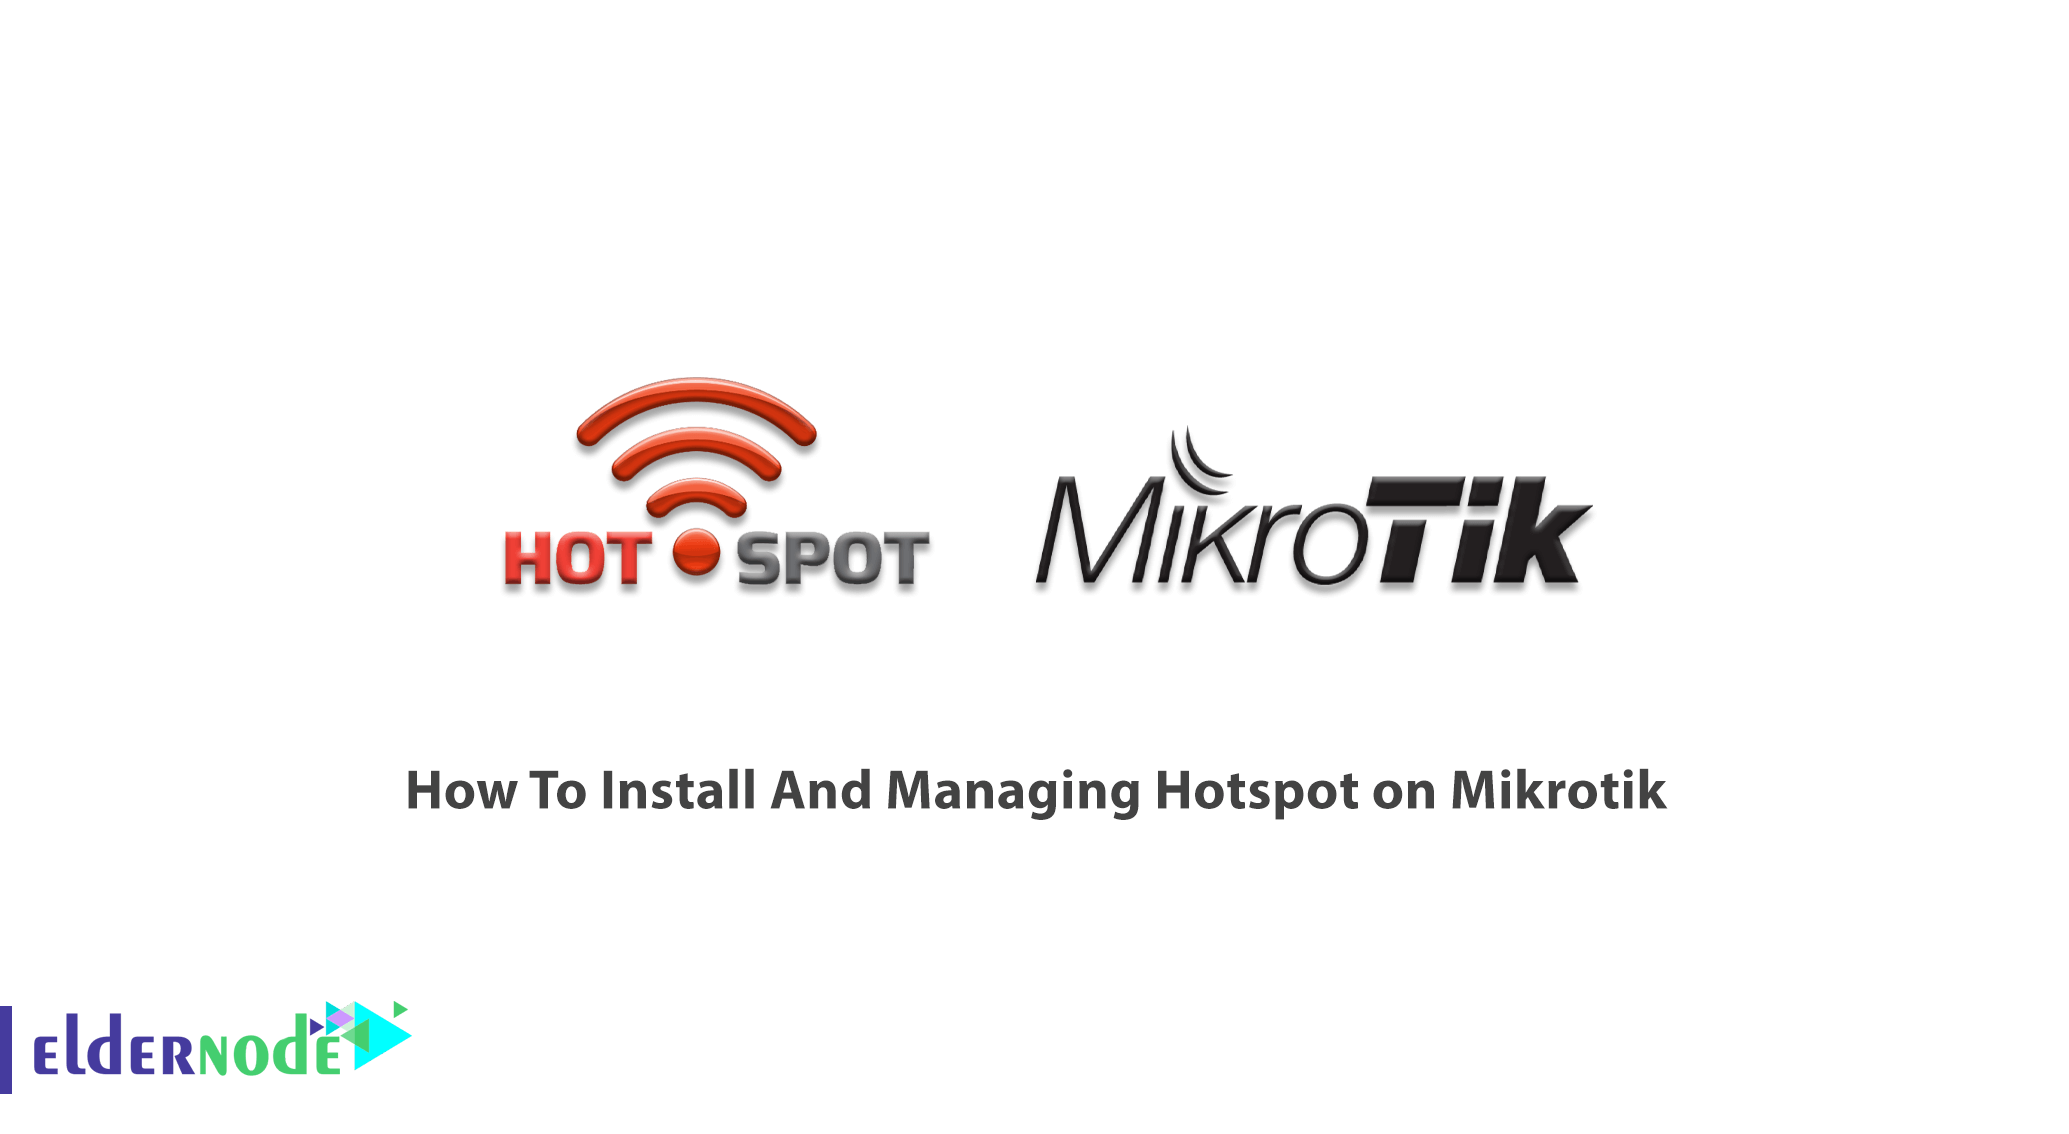 How To Install And Managing Hotspot on Mikrotik